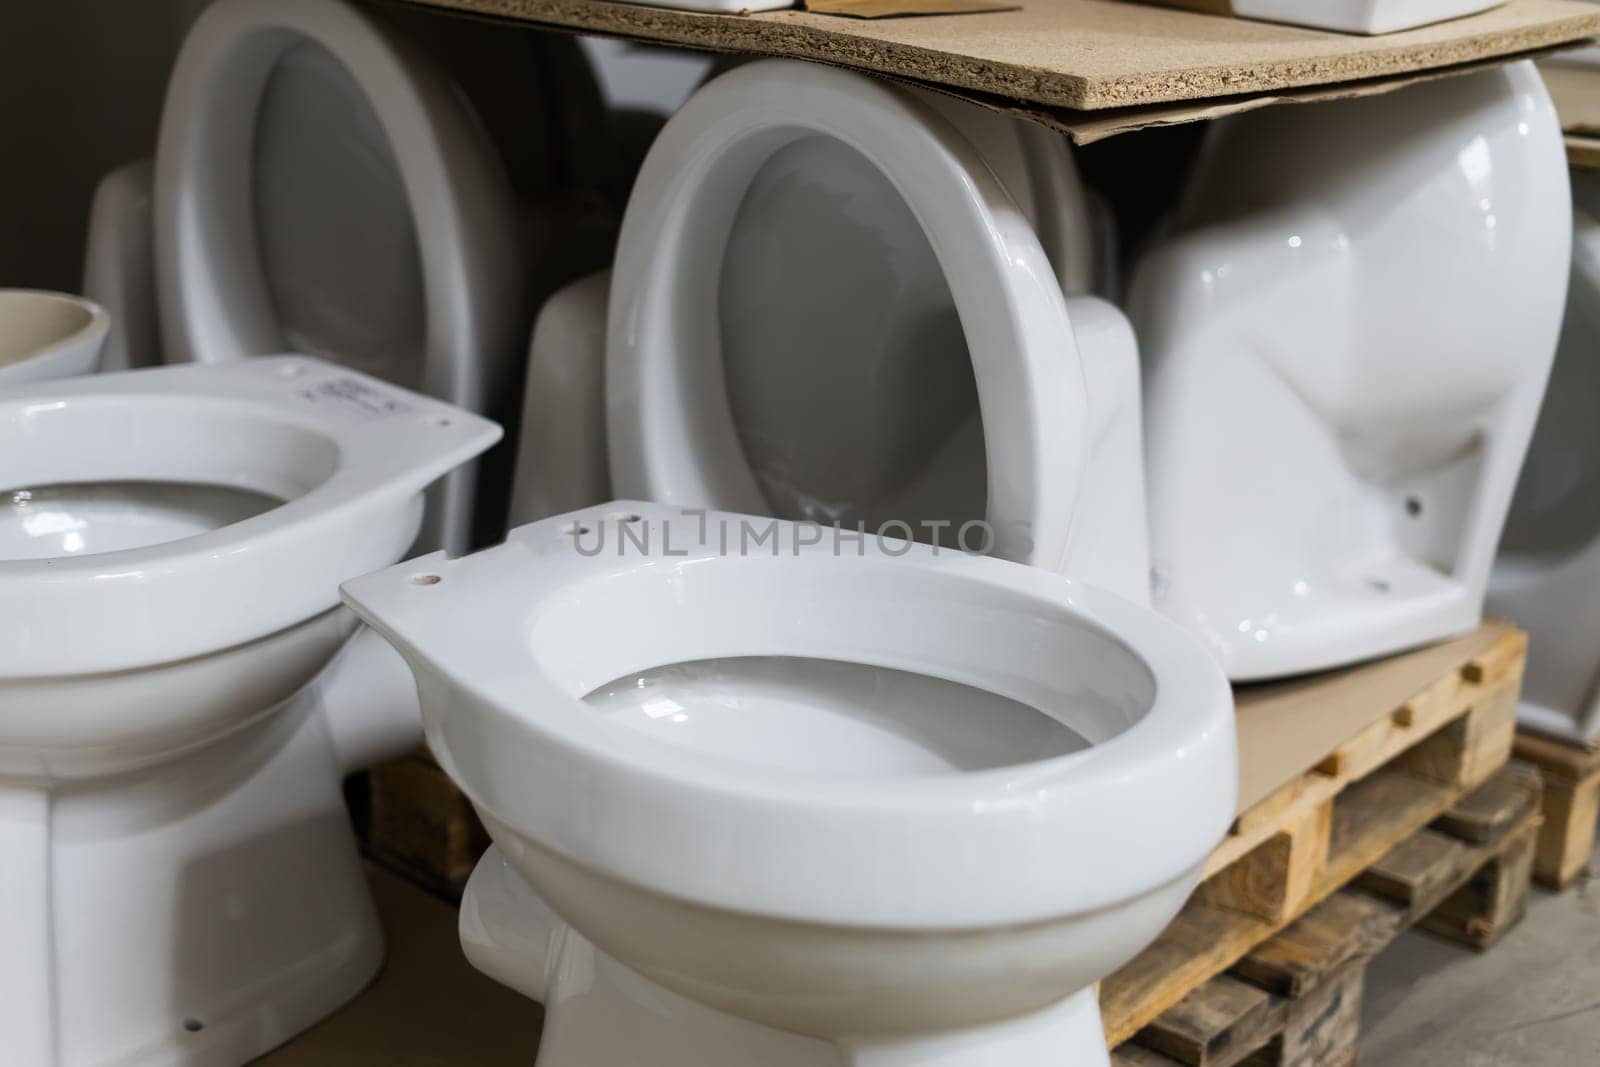 Showcase with toilets. Sale in a plumbing store of toilet bowls of different models.